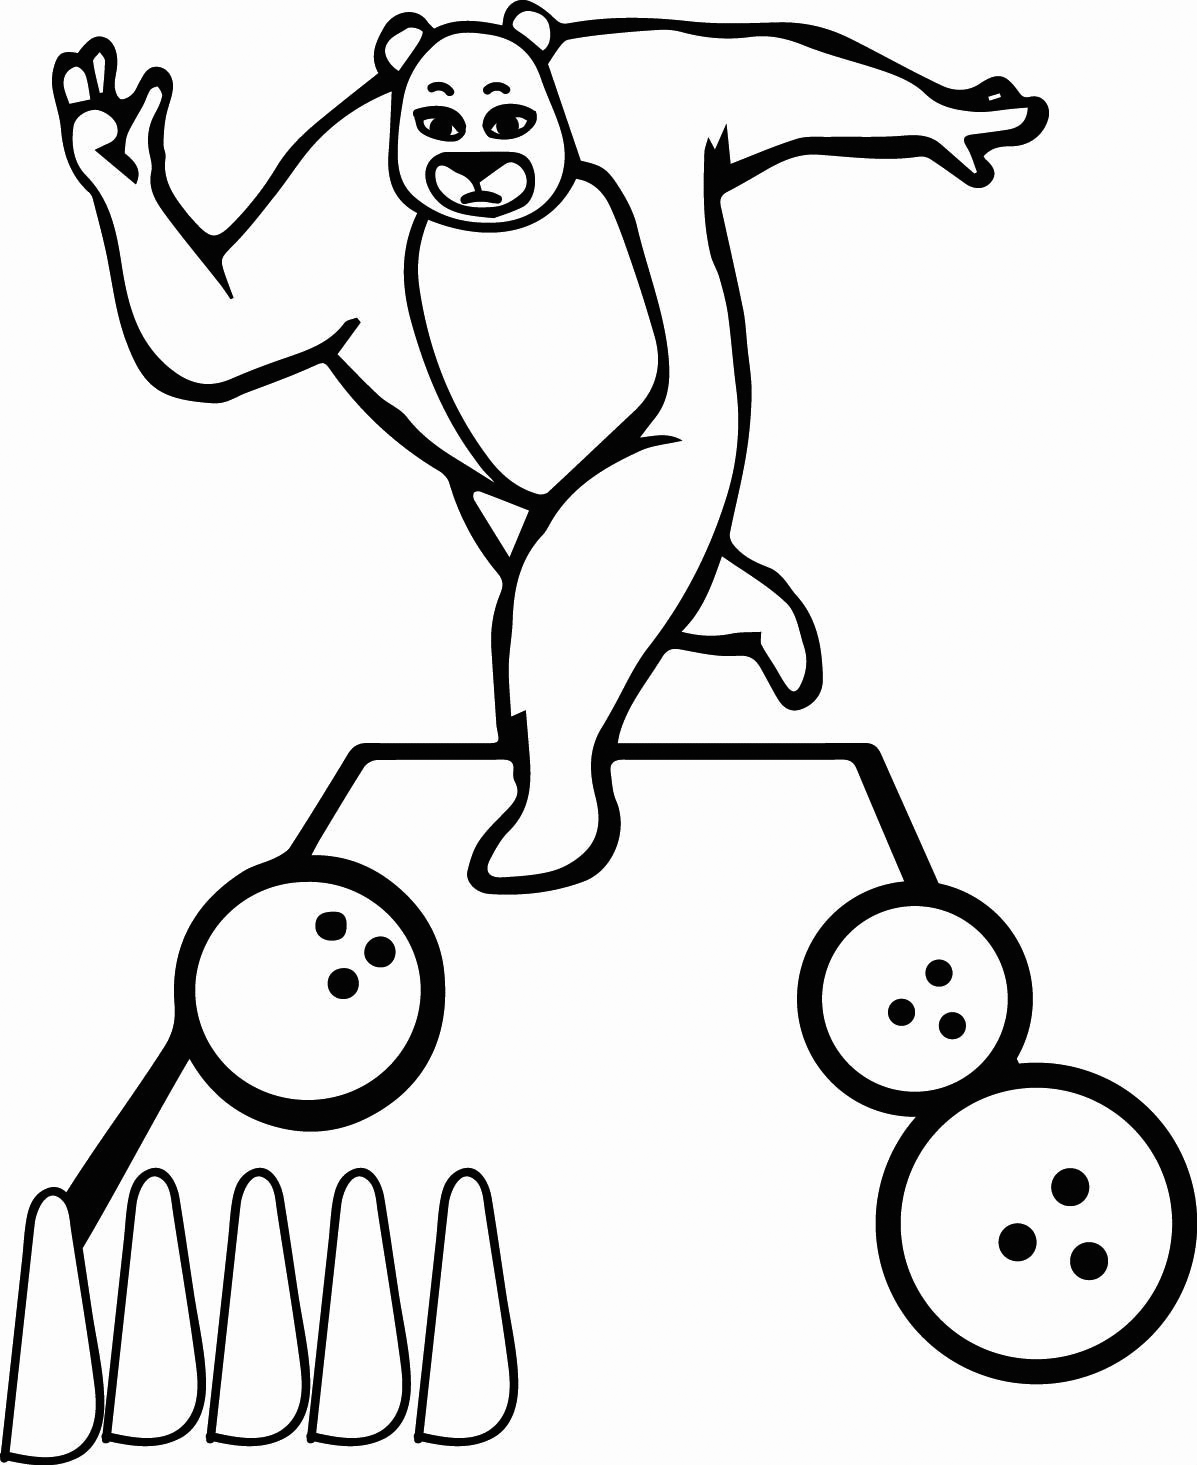 Bowling Bears Coloring Page